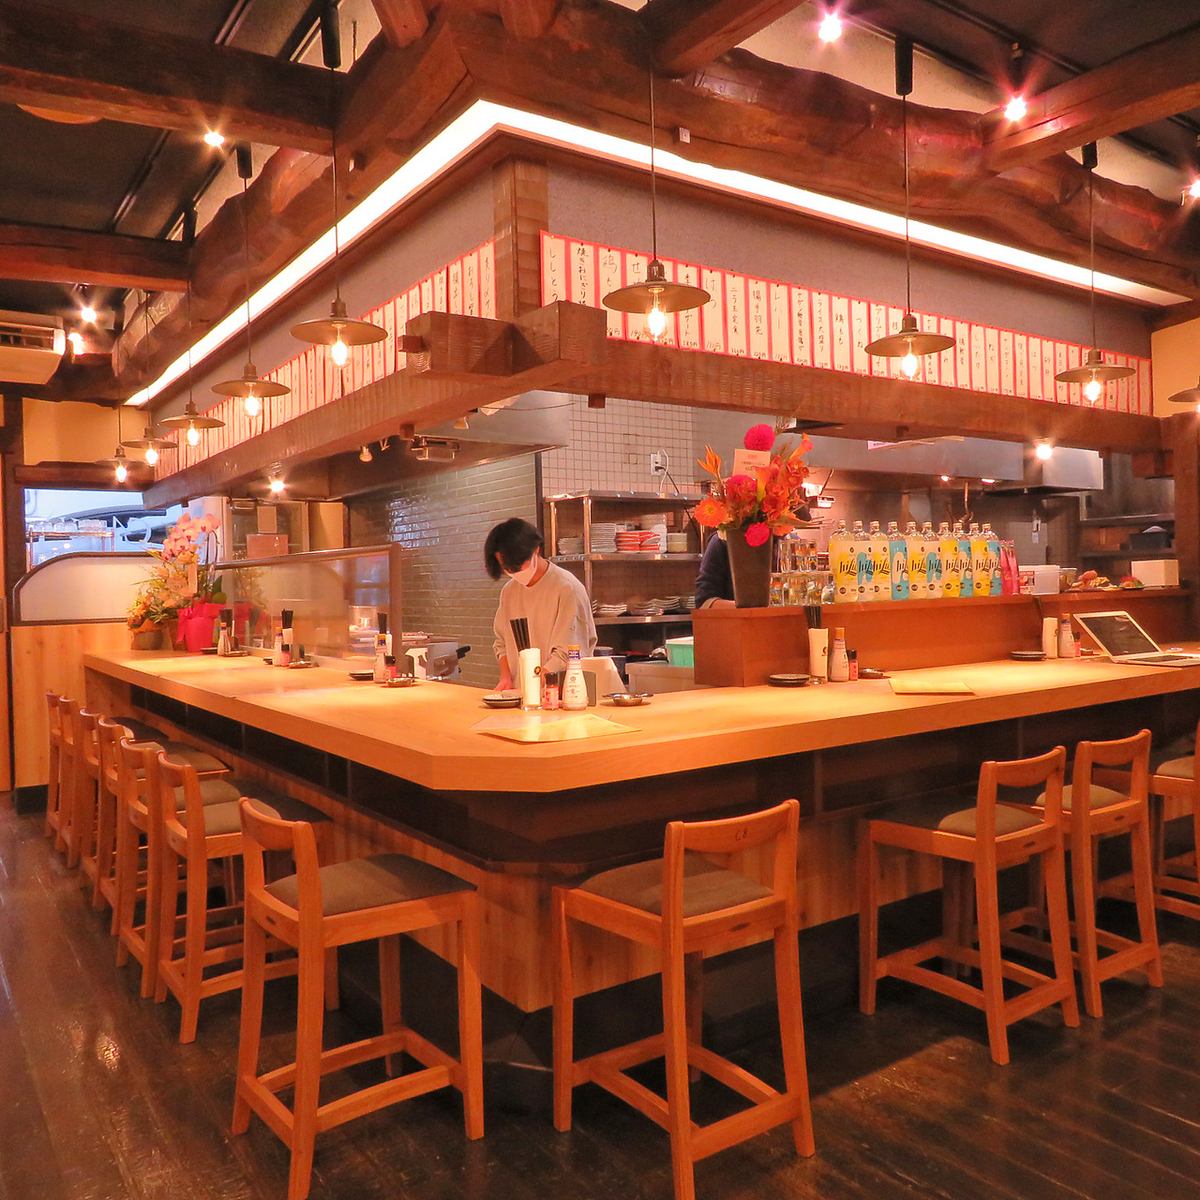 A popular neo-popular izakaya in Sendai that offers good value for money and allows smoking.